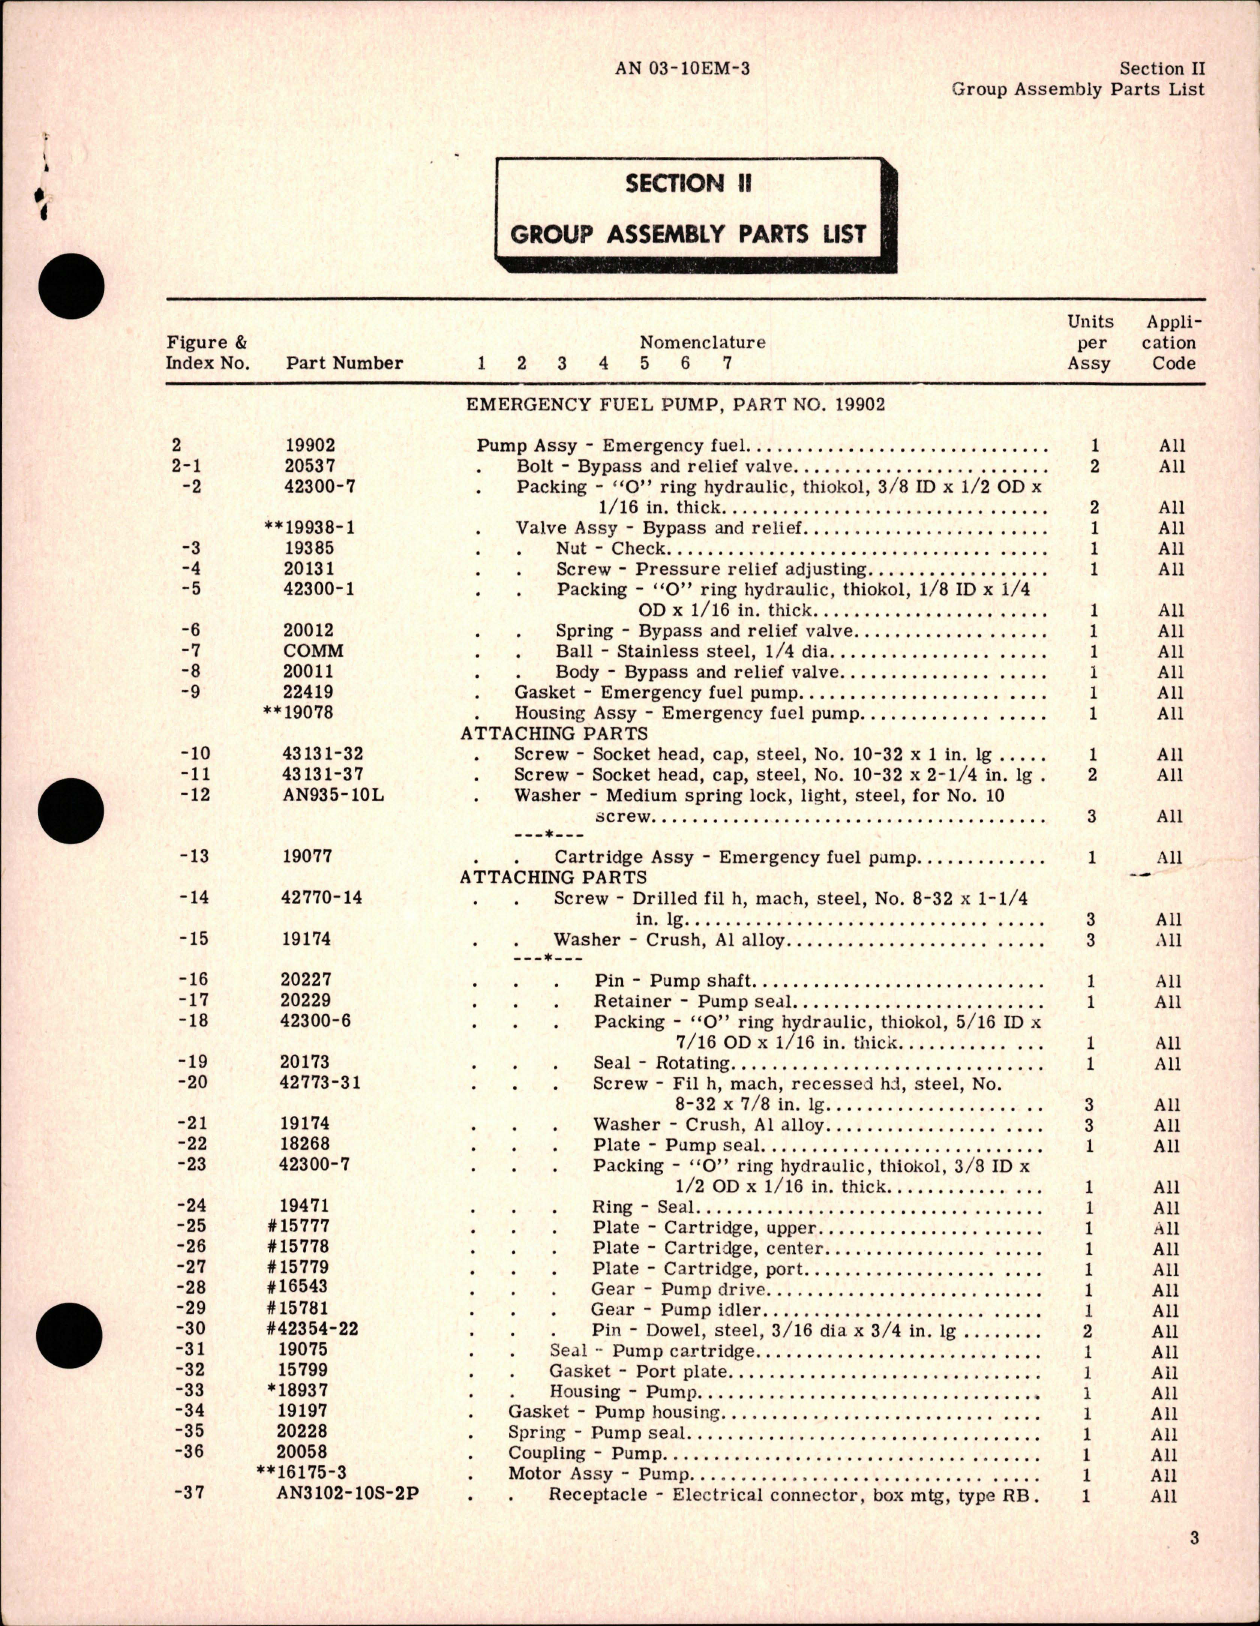 Sample page 5 from AirCorps Library document: Parts Catalog for Emergency Fuel Pump - Parts 19902 and 20653-2